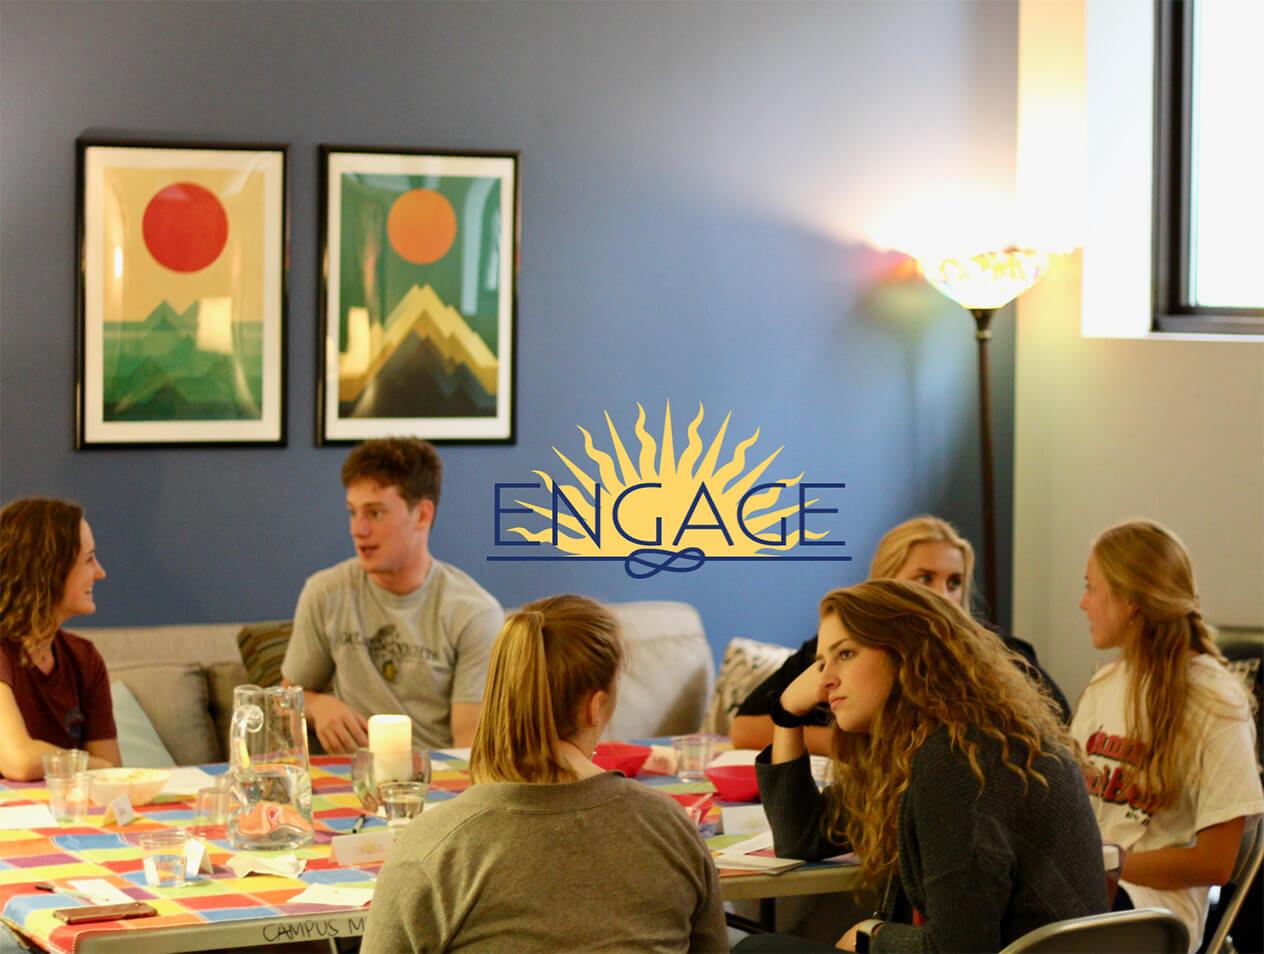 Students sitting at a table and talking during an ENGAGE event